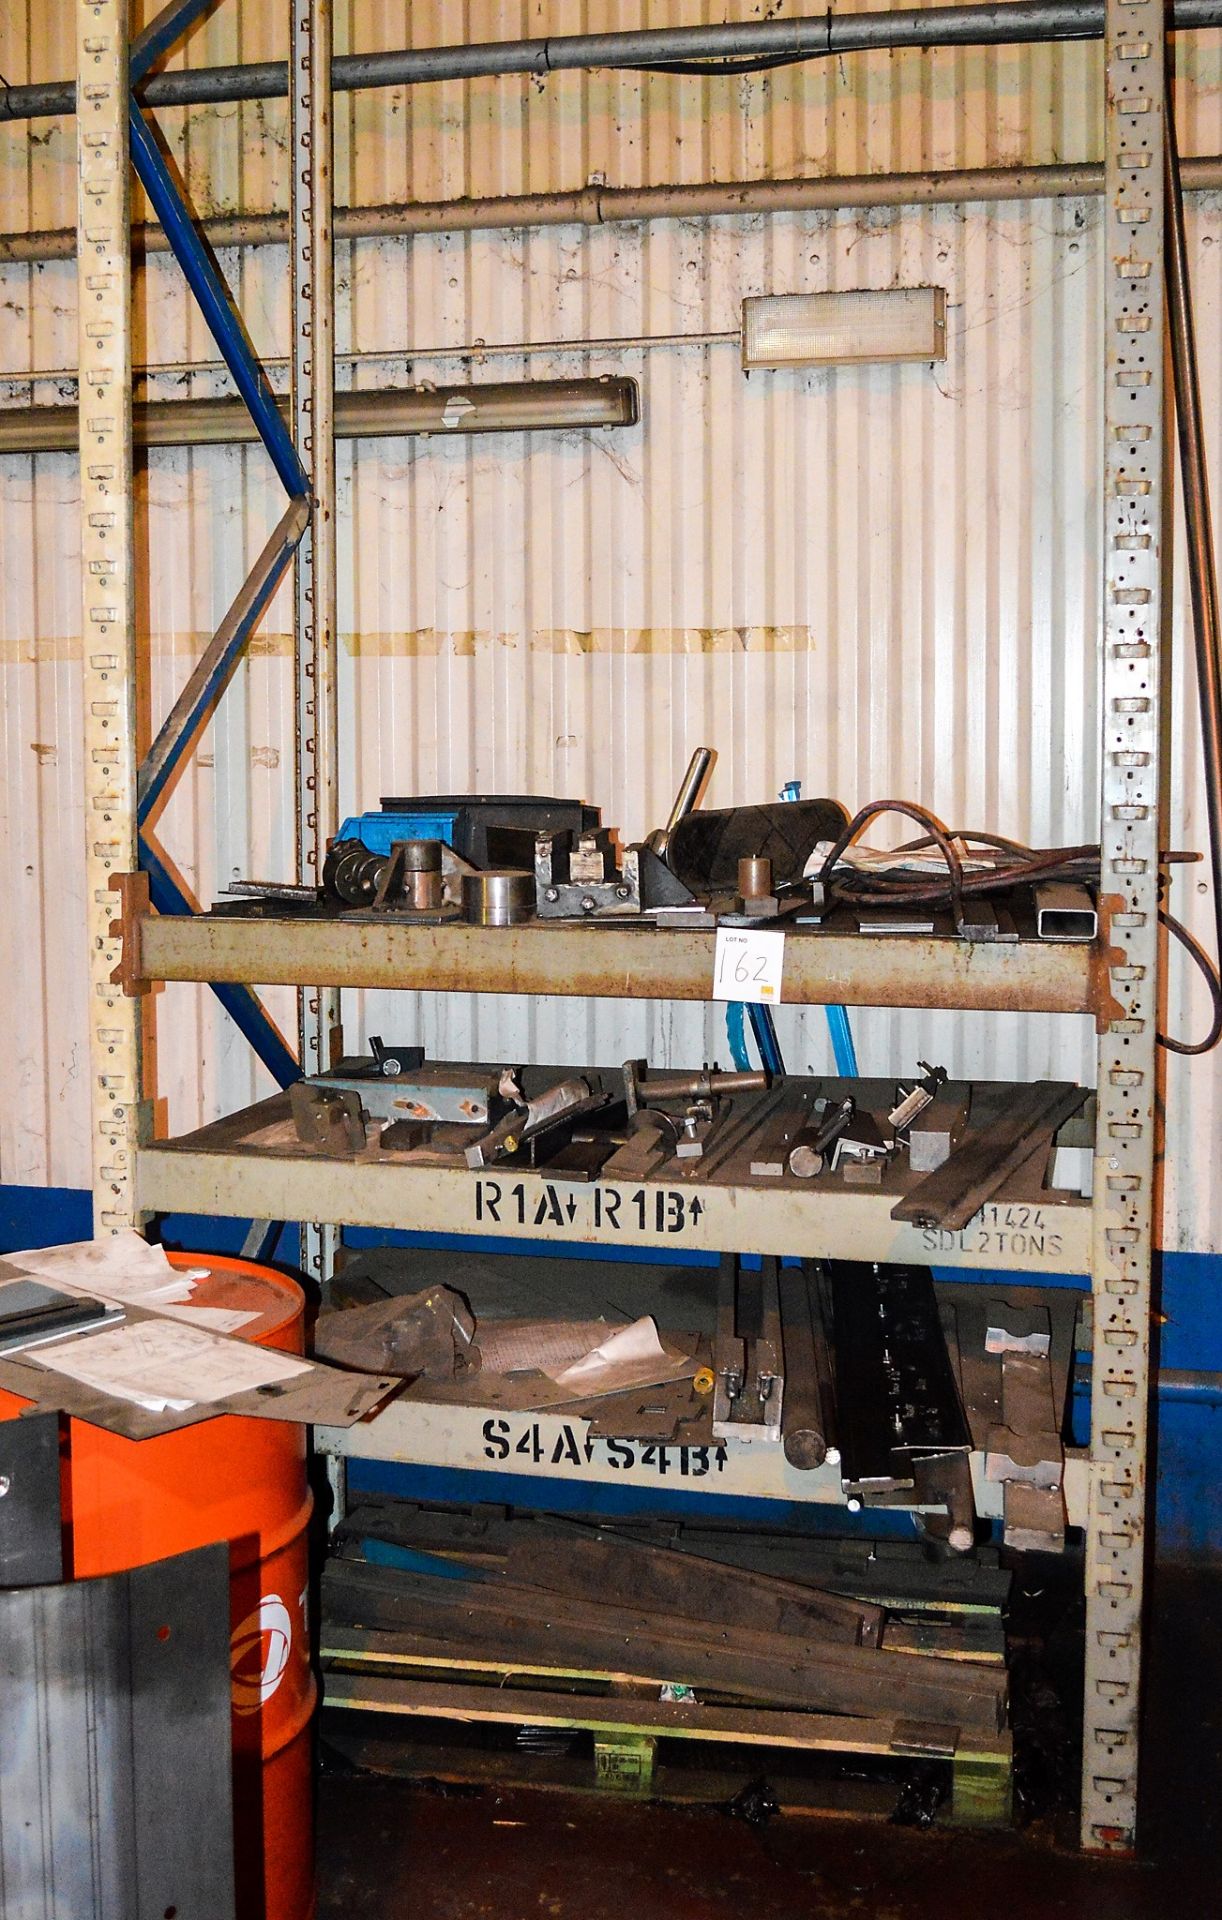 Steel rack & contents as lotted